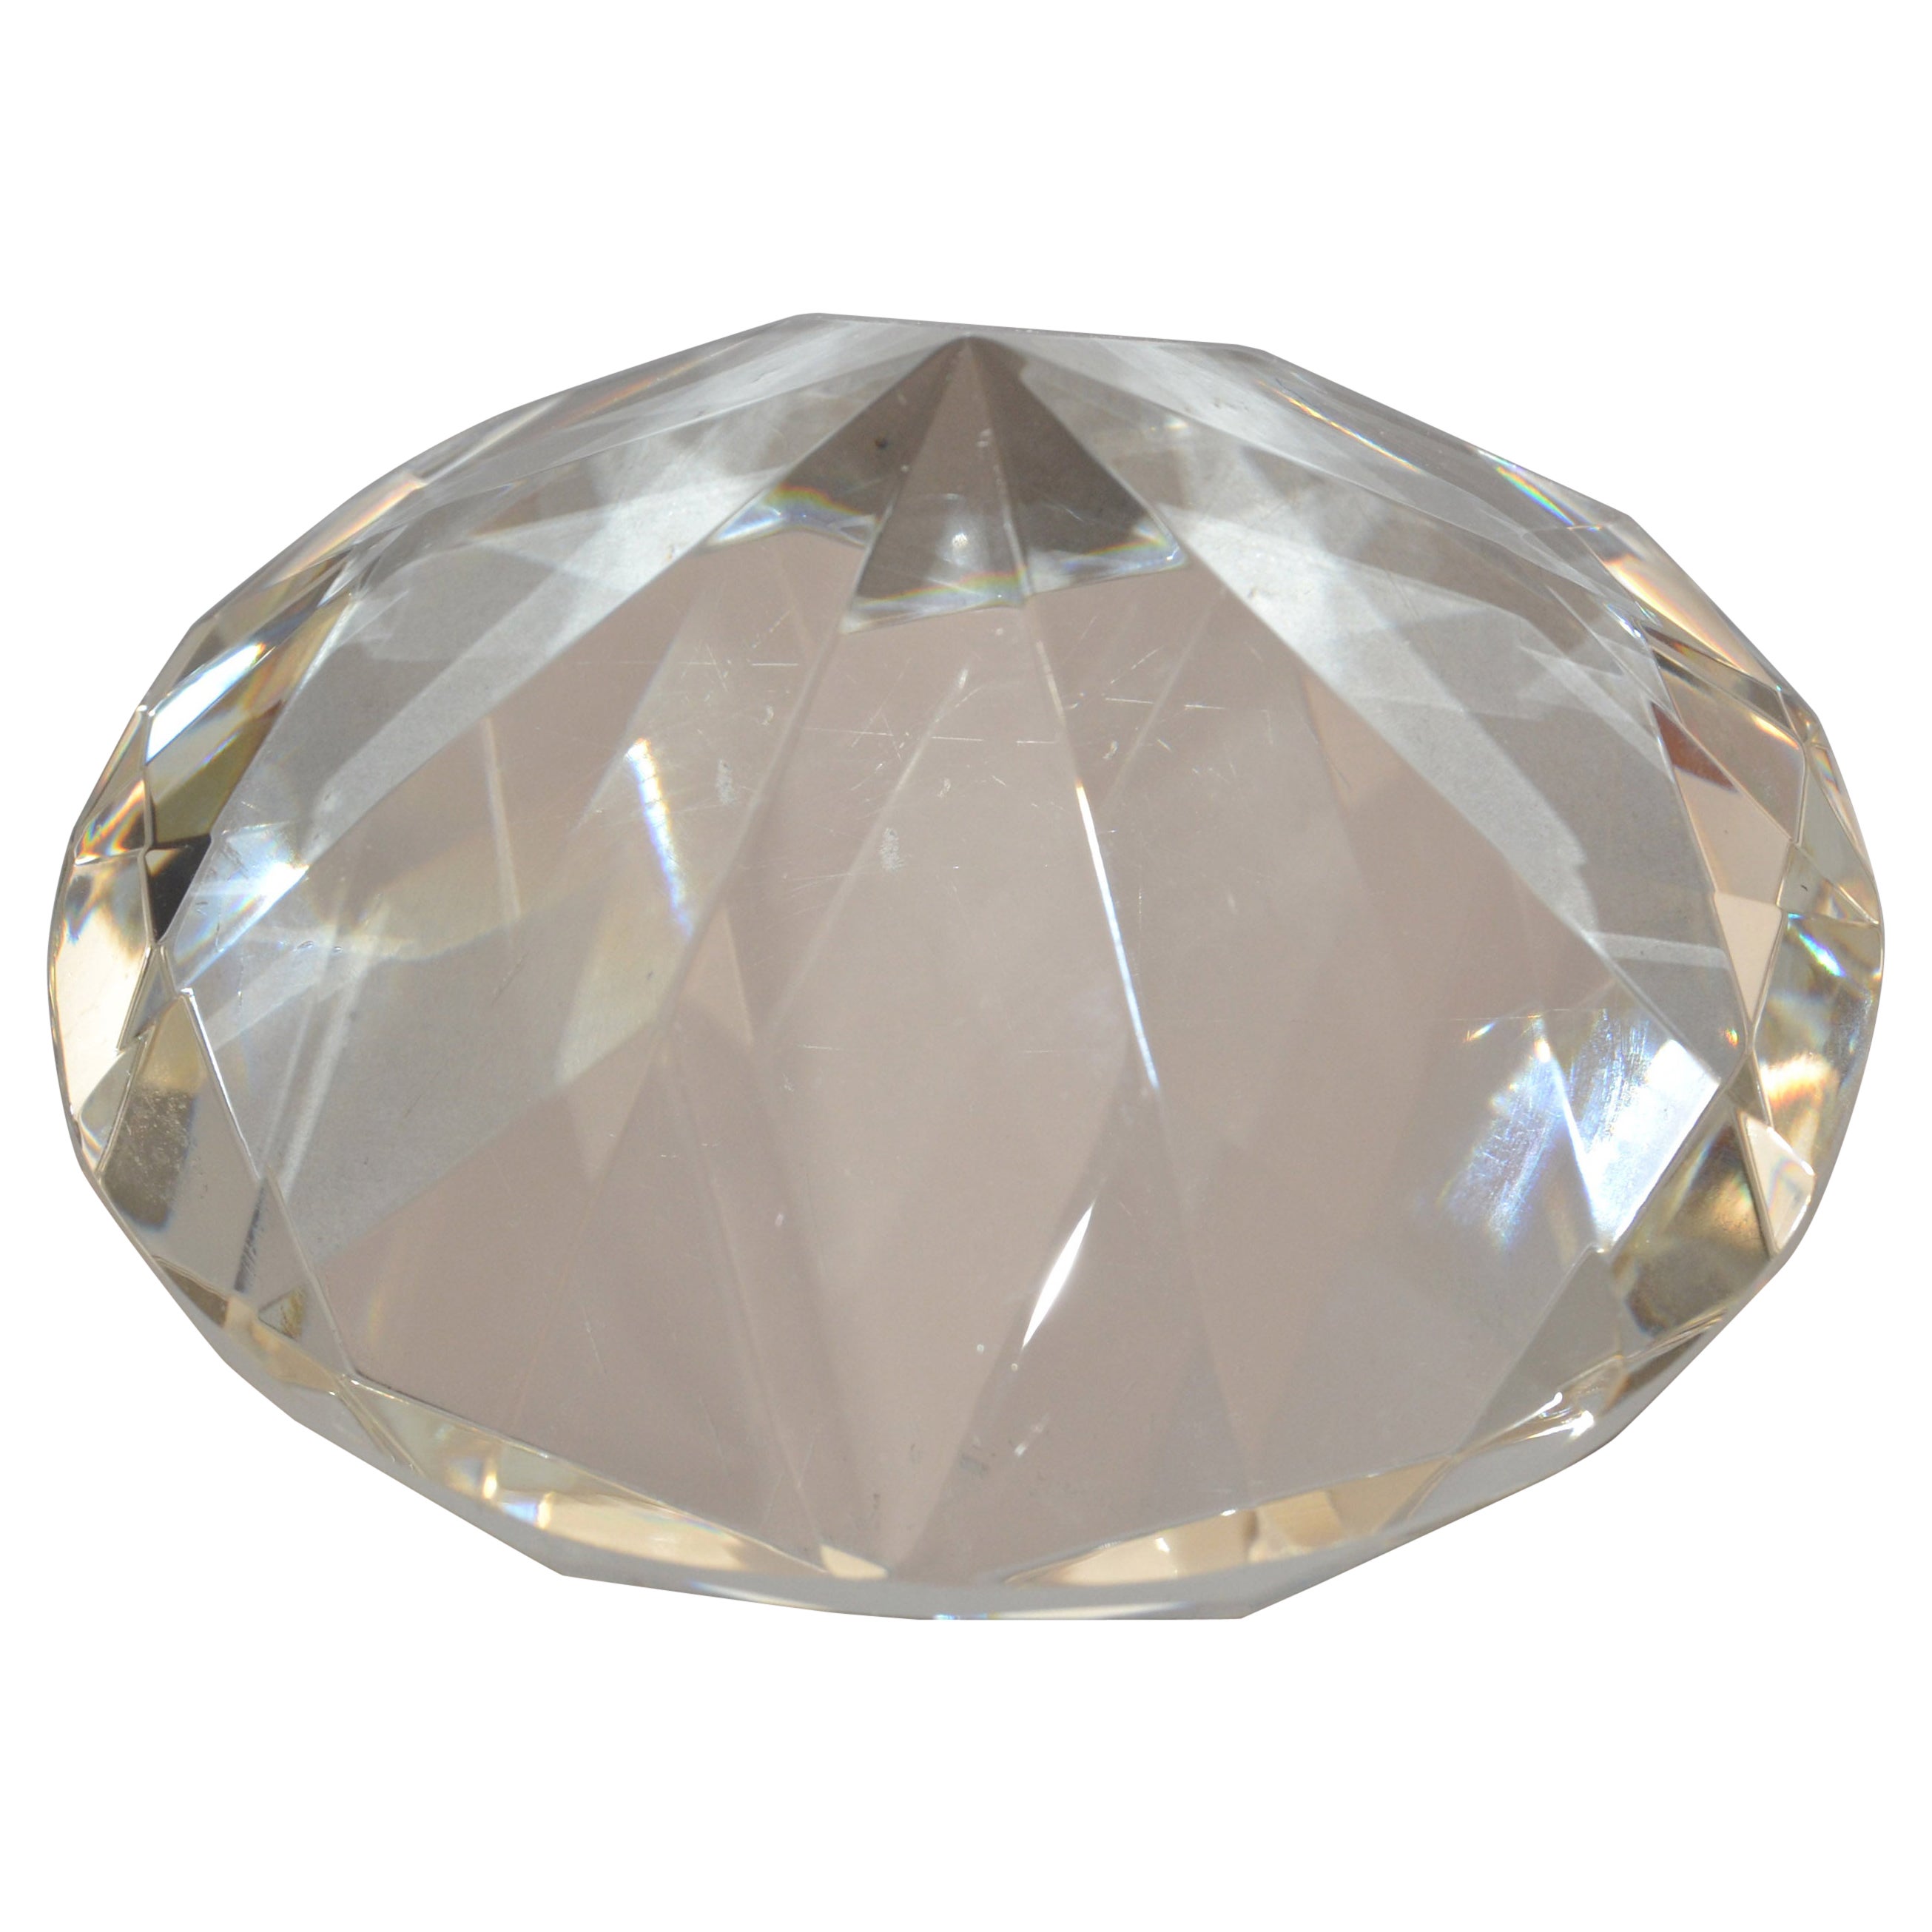 One Mid-Century Modern Faceted Glass Diamond Shaped Figurine Paperweight Desk  For Sale